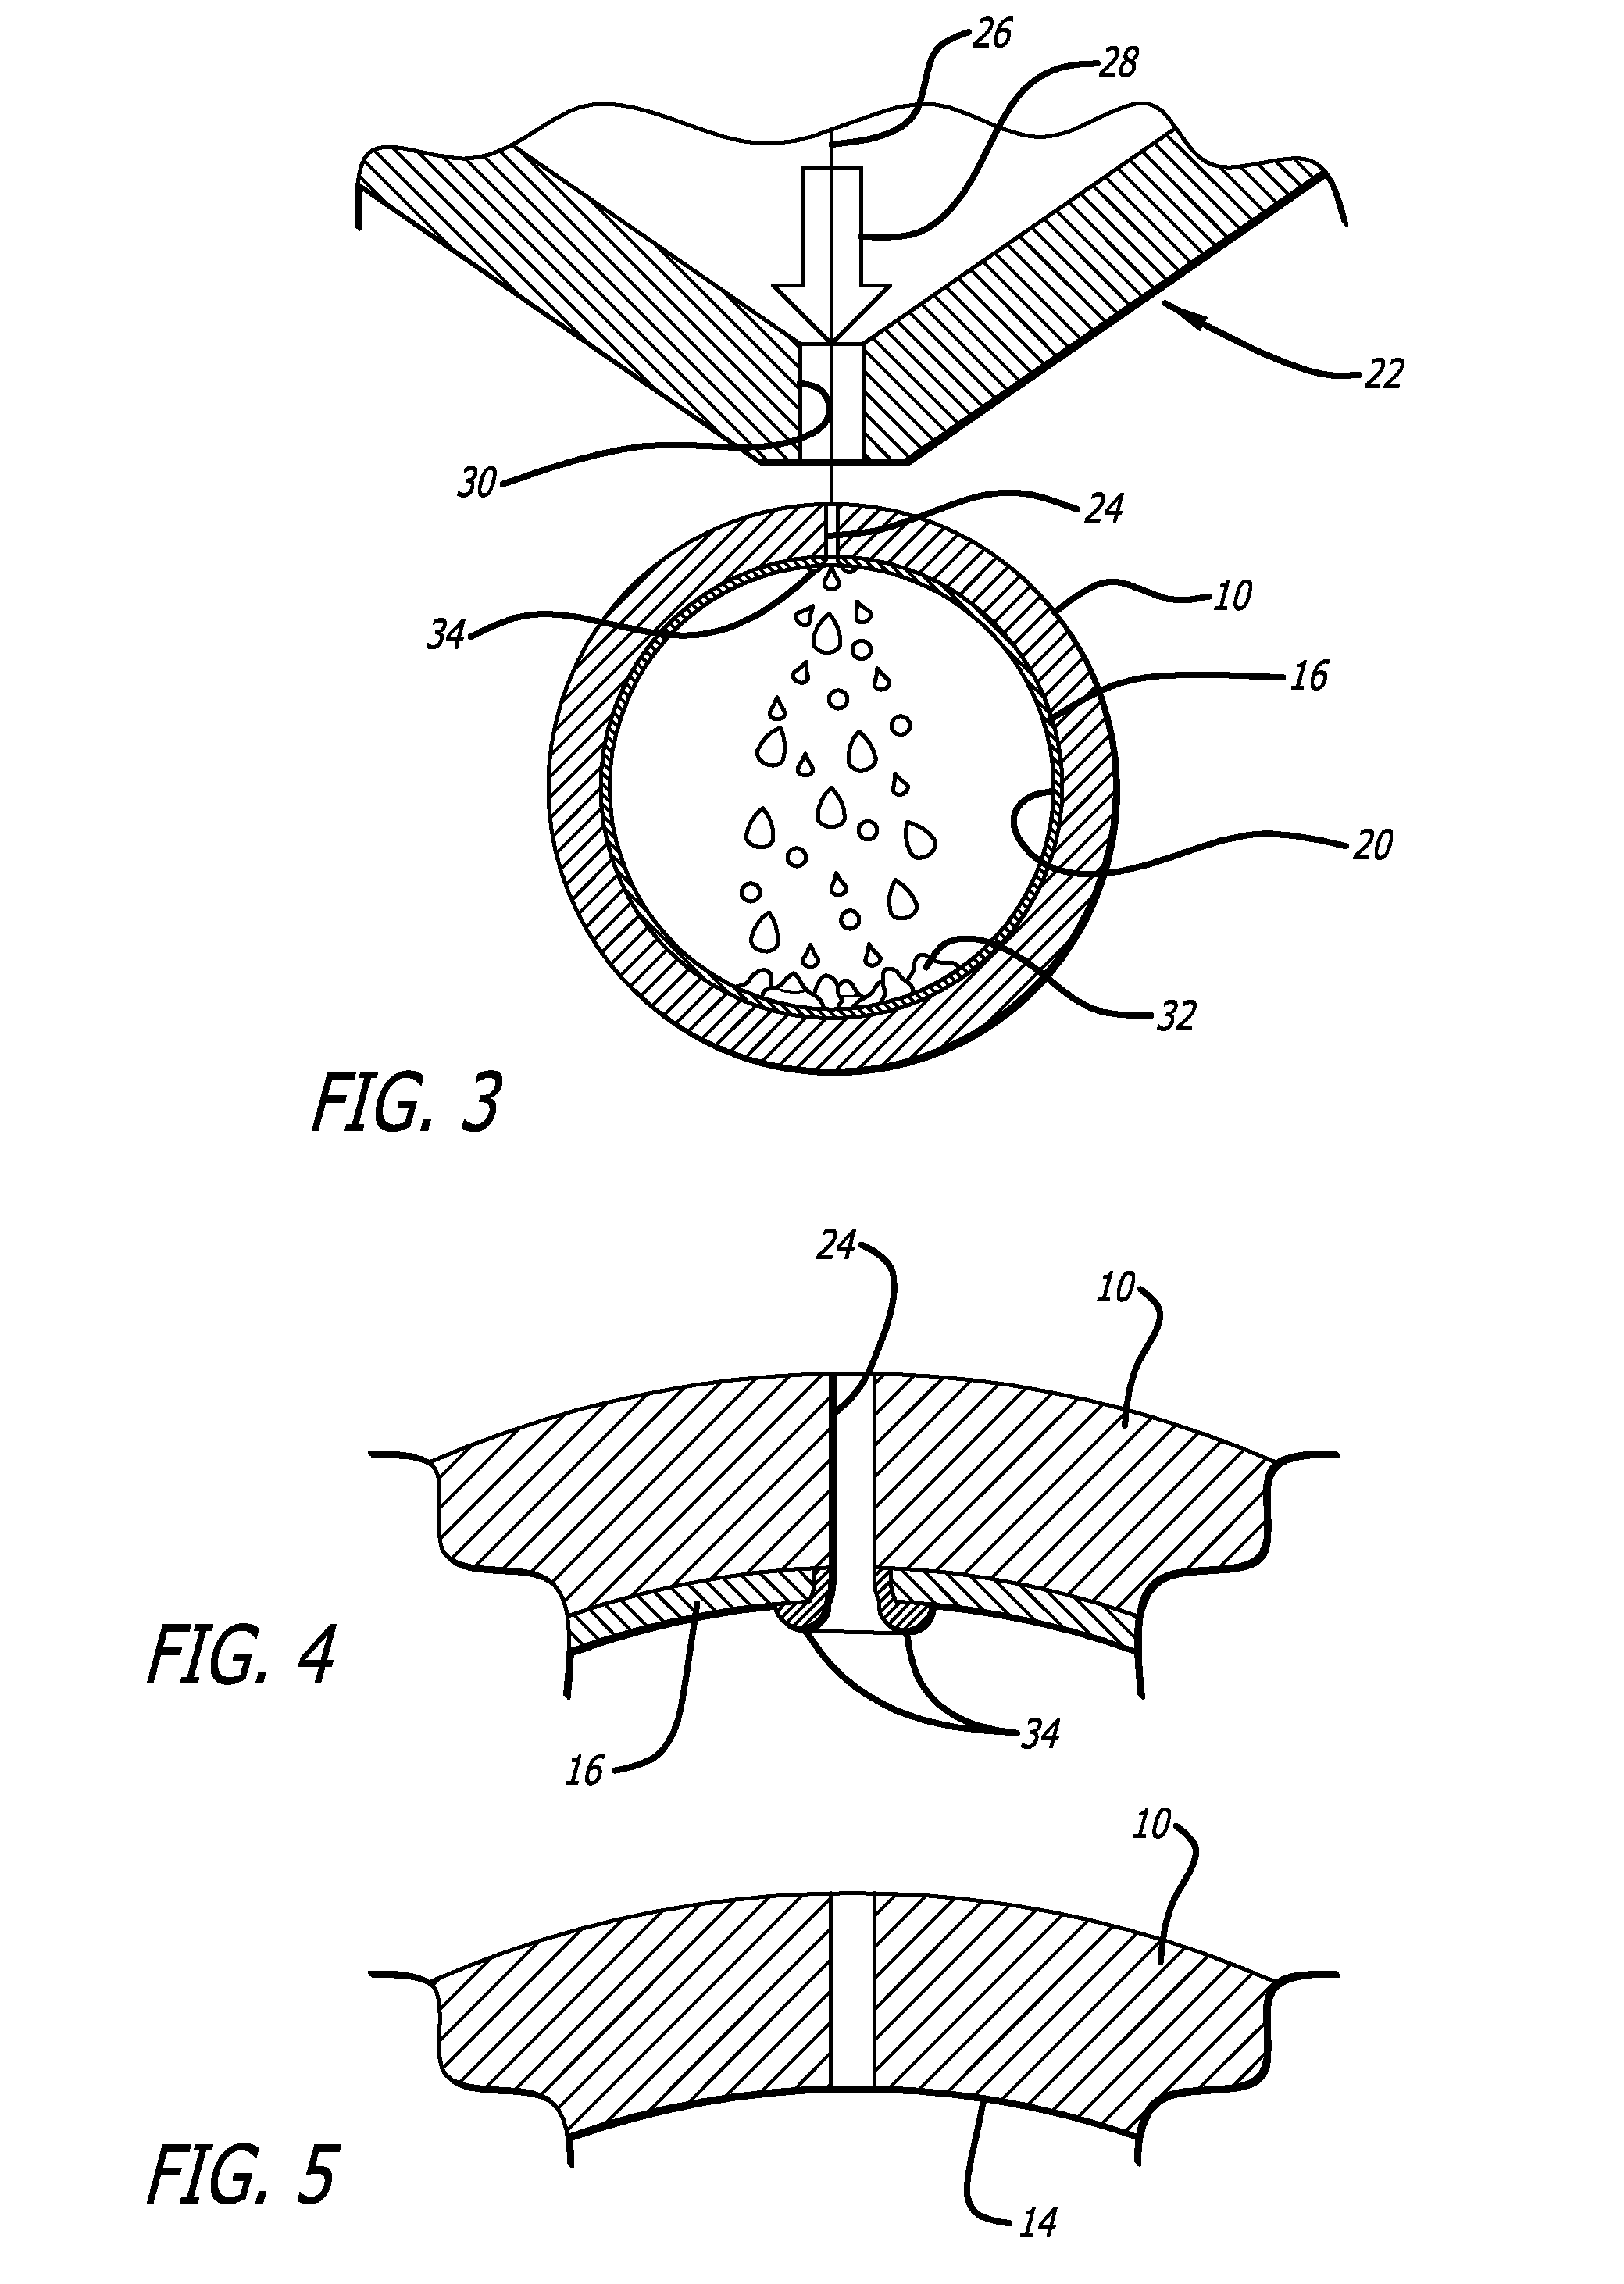 Method for laser cutting tubing using inert gas and a disposable mask